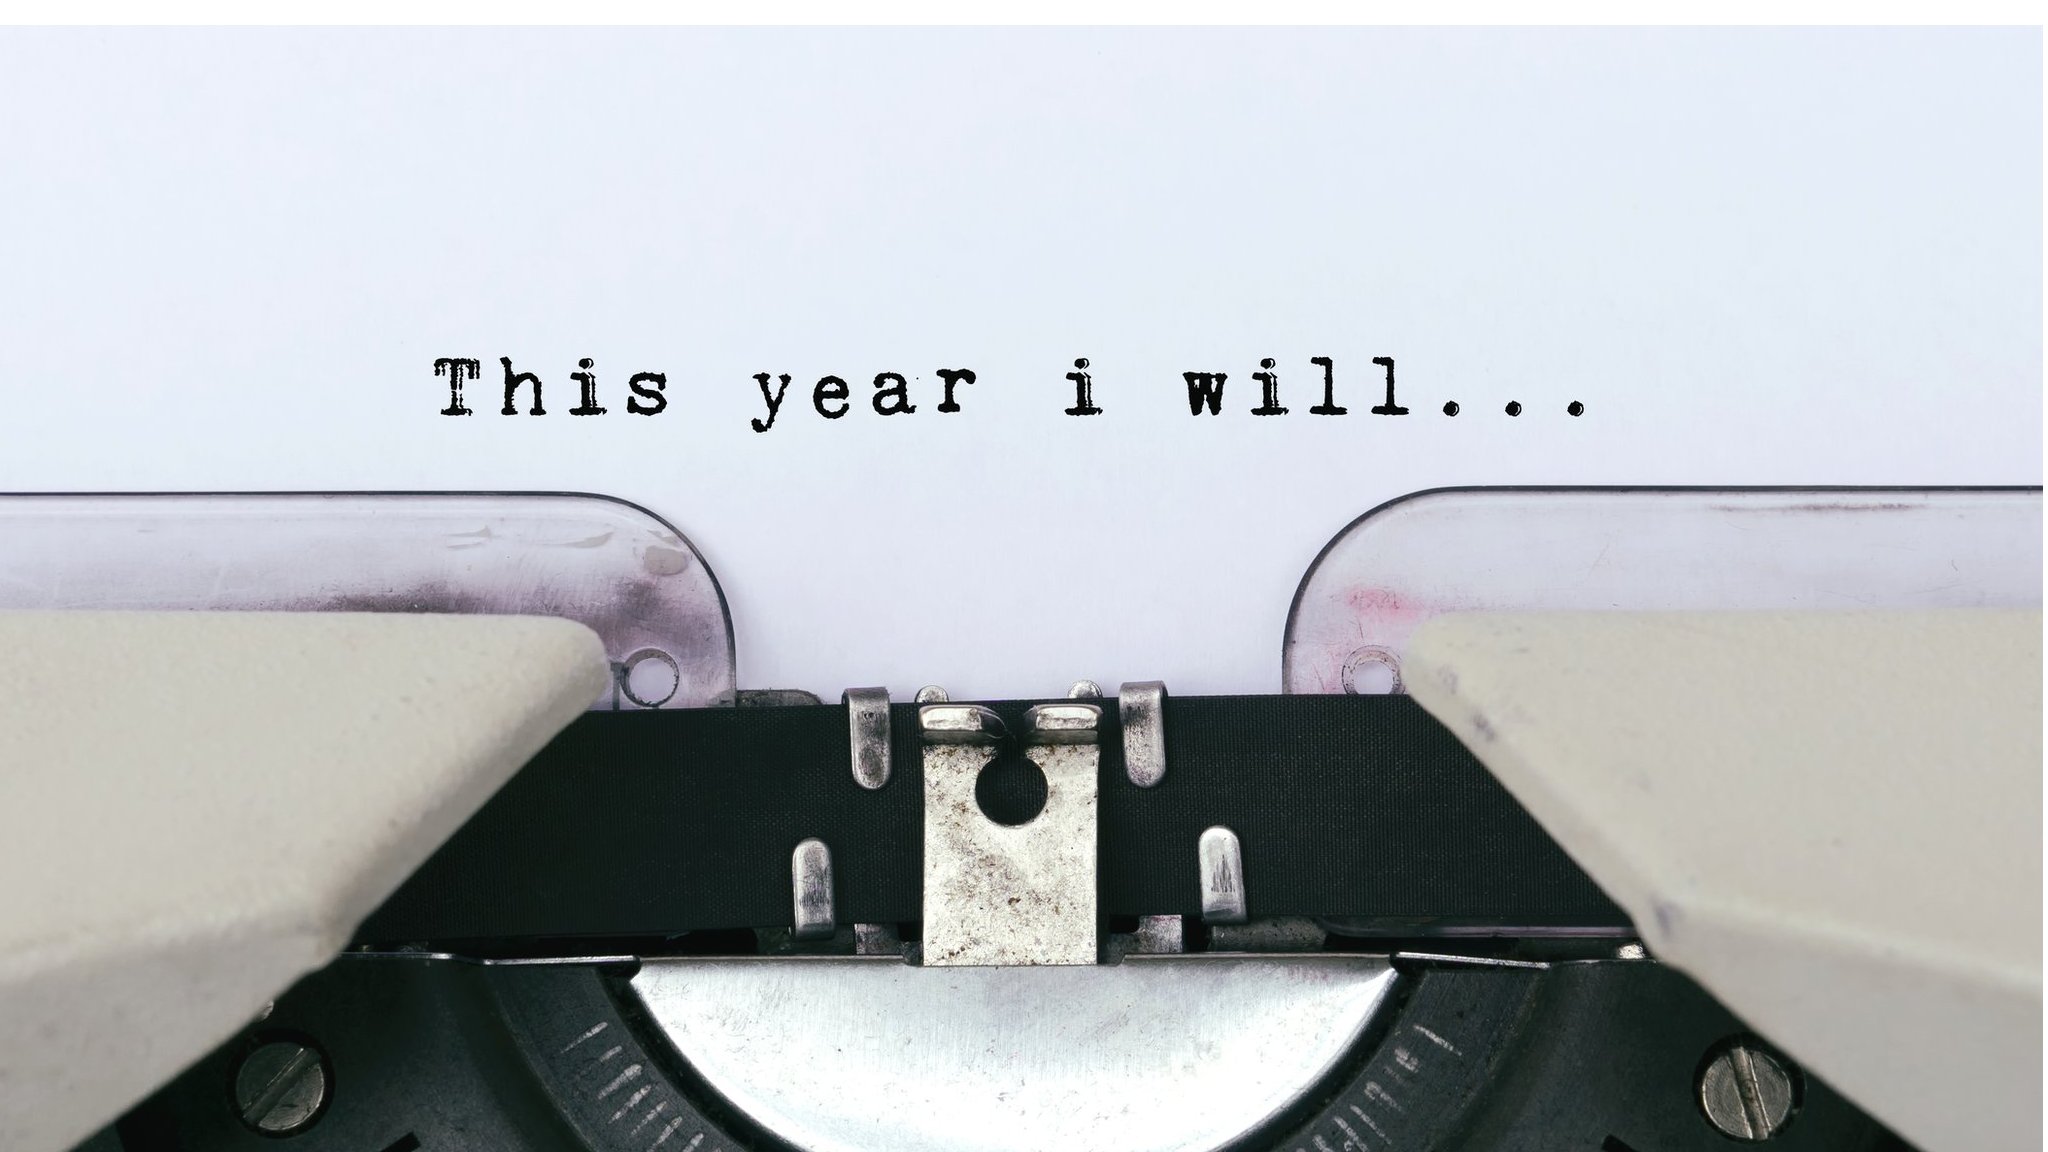 Typewriter with 'This year I will..' message